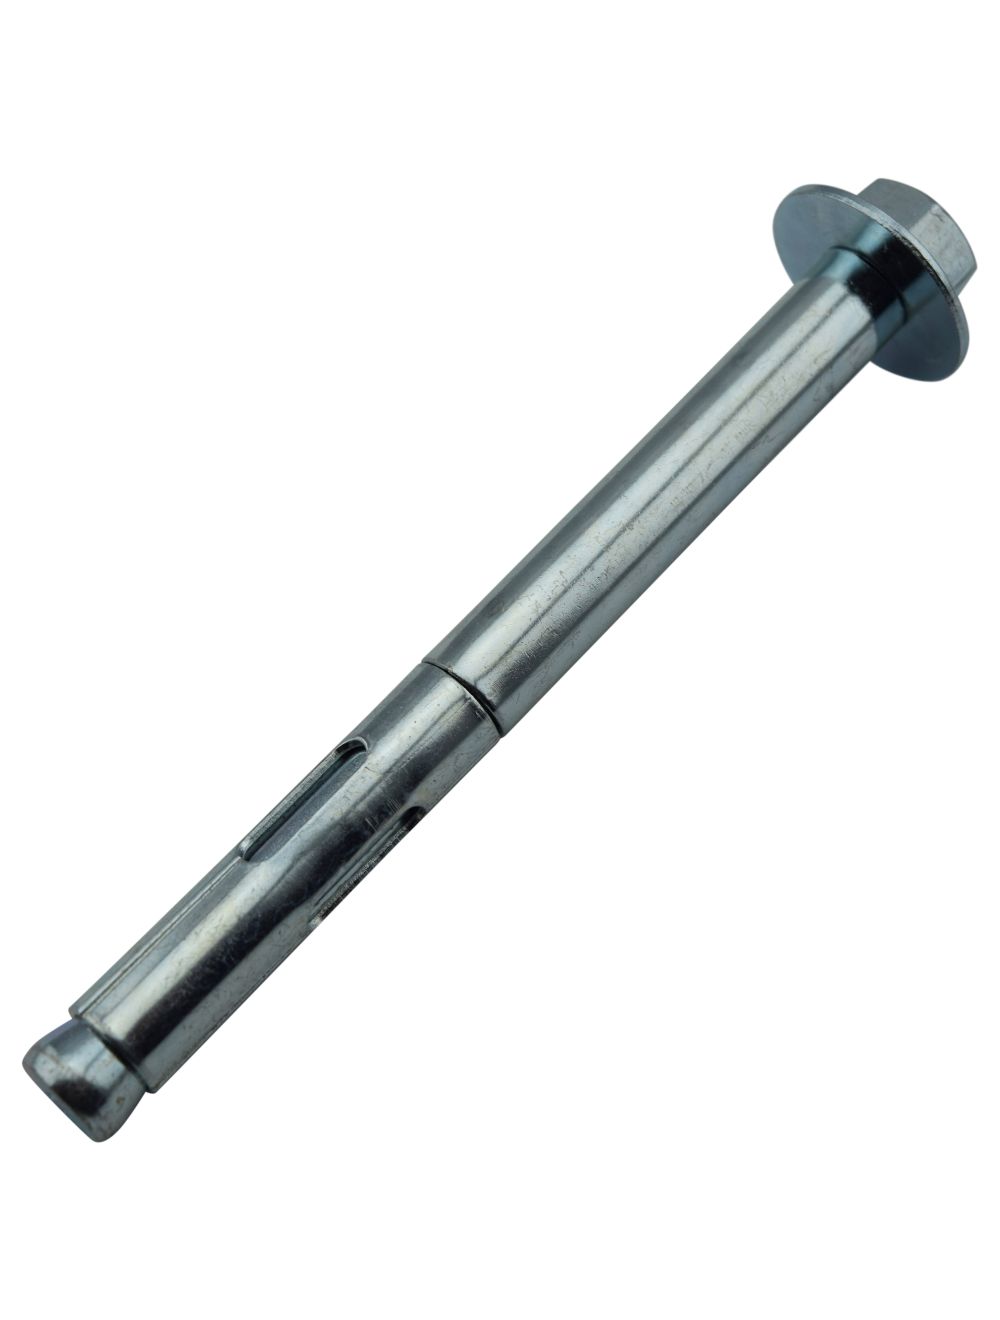 3/8 X 4 Stainless Steel Hex Head Sleeve Anchors Box of 50 